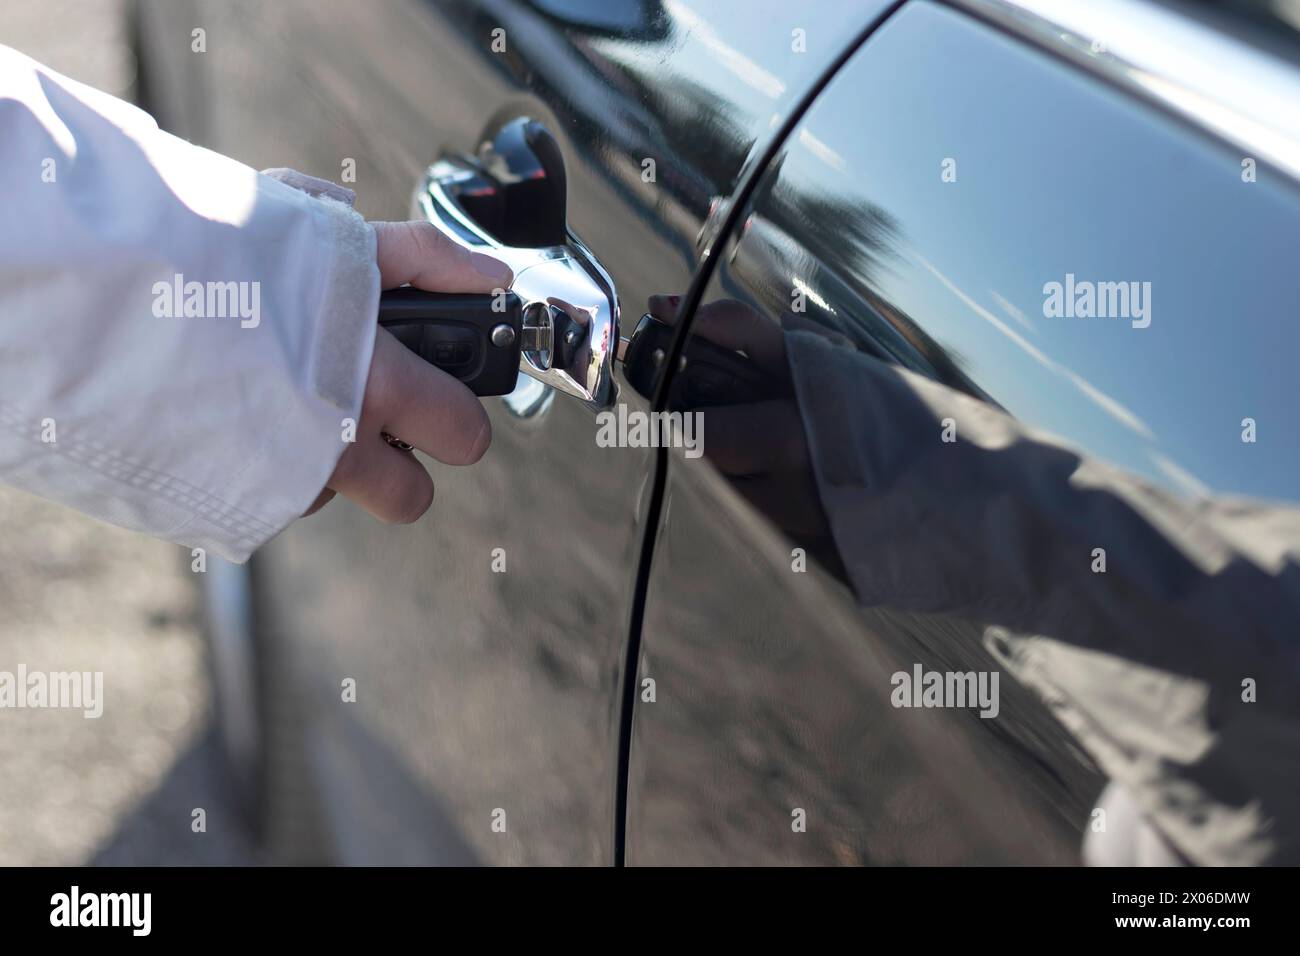 Close-up of a hand holding car keys and key fob, about to unlock a shiny car door. Focus on security and access Stock Photo